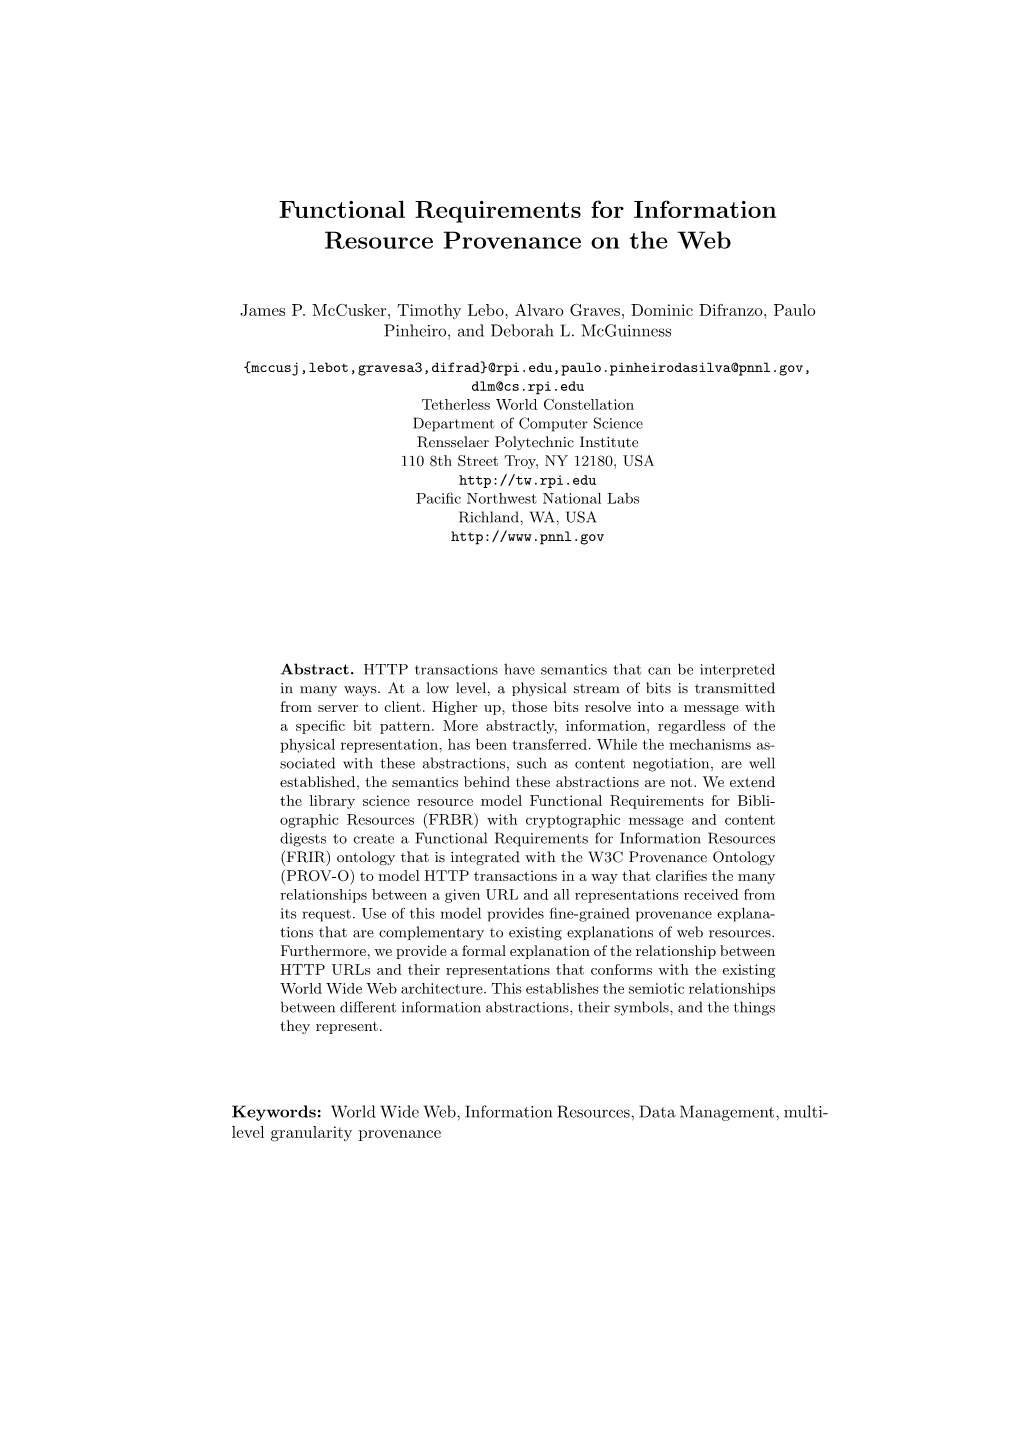 Functional Requirements for Information Resource Provenance on the Web